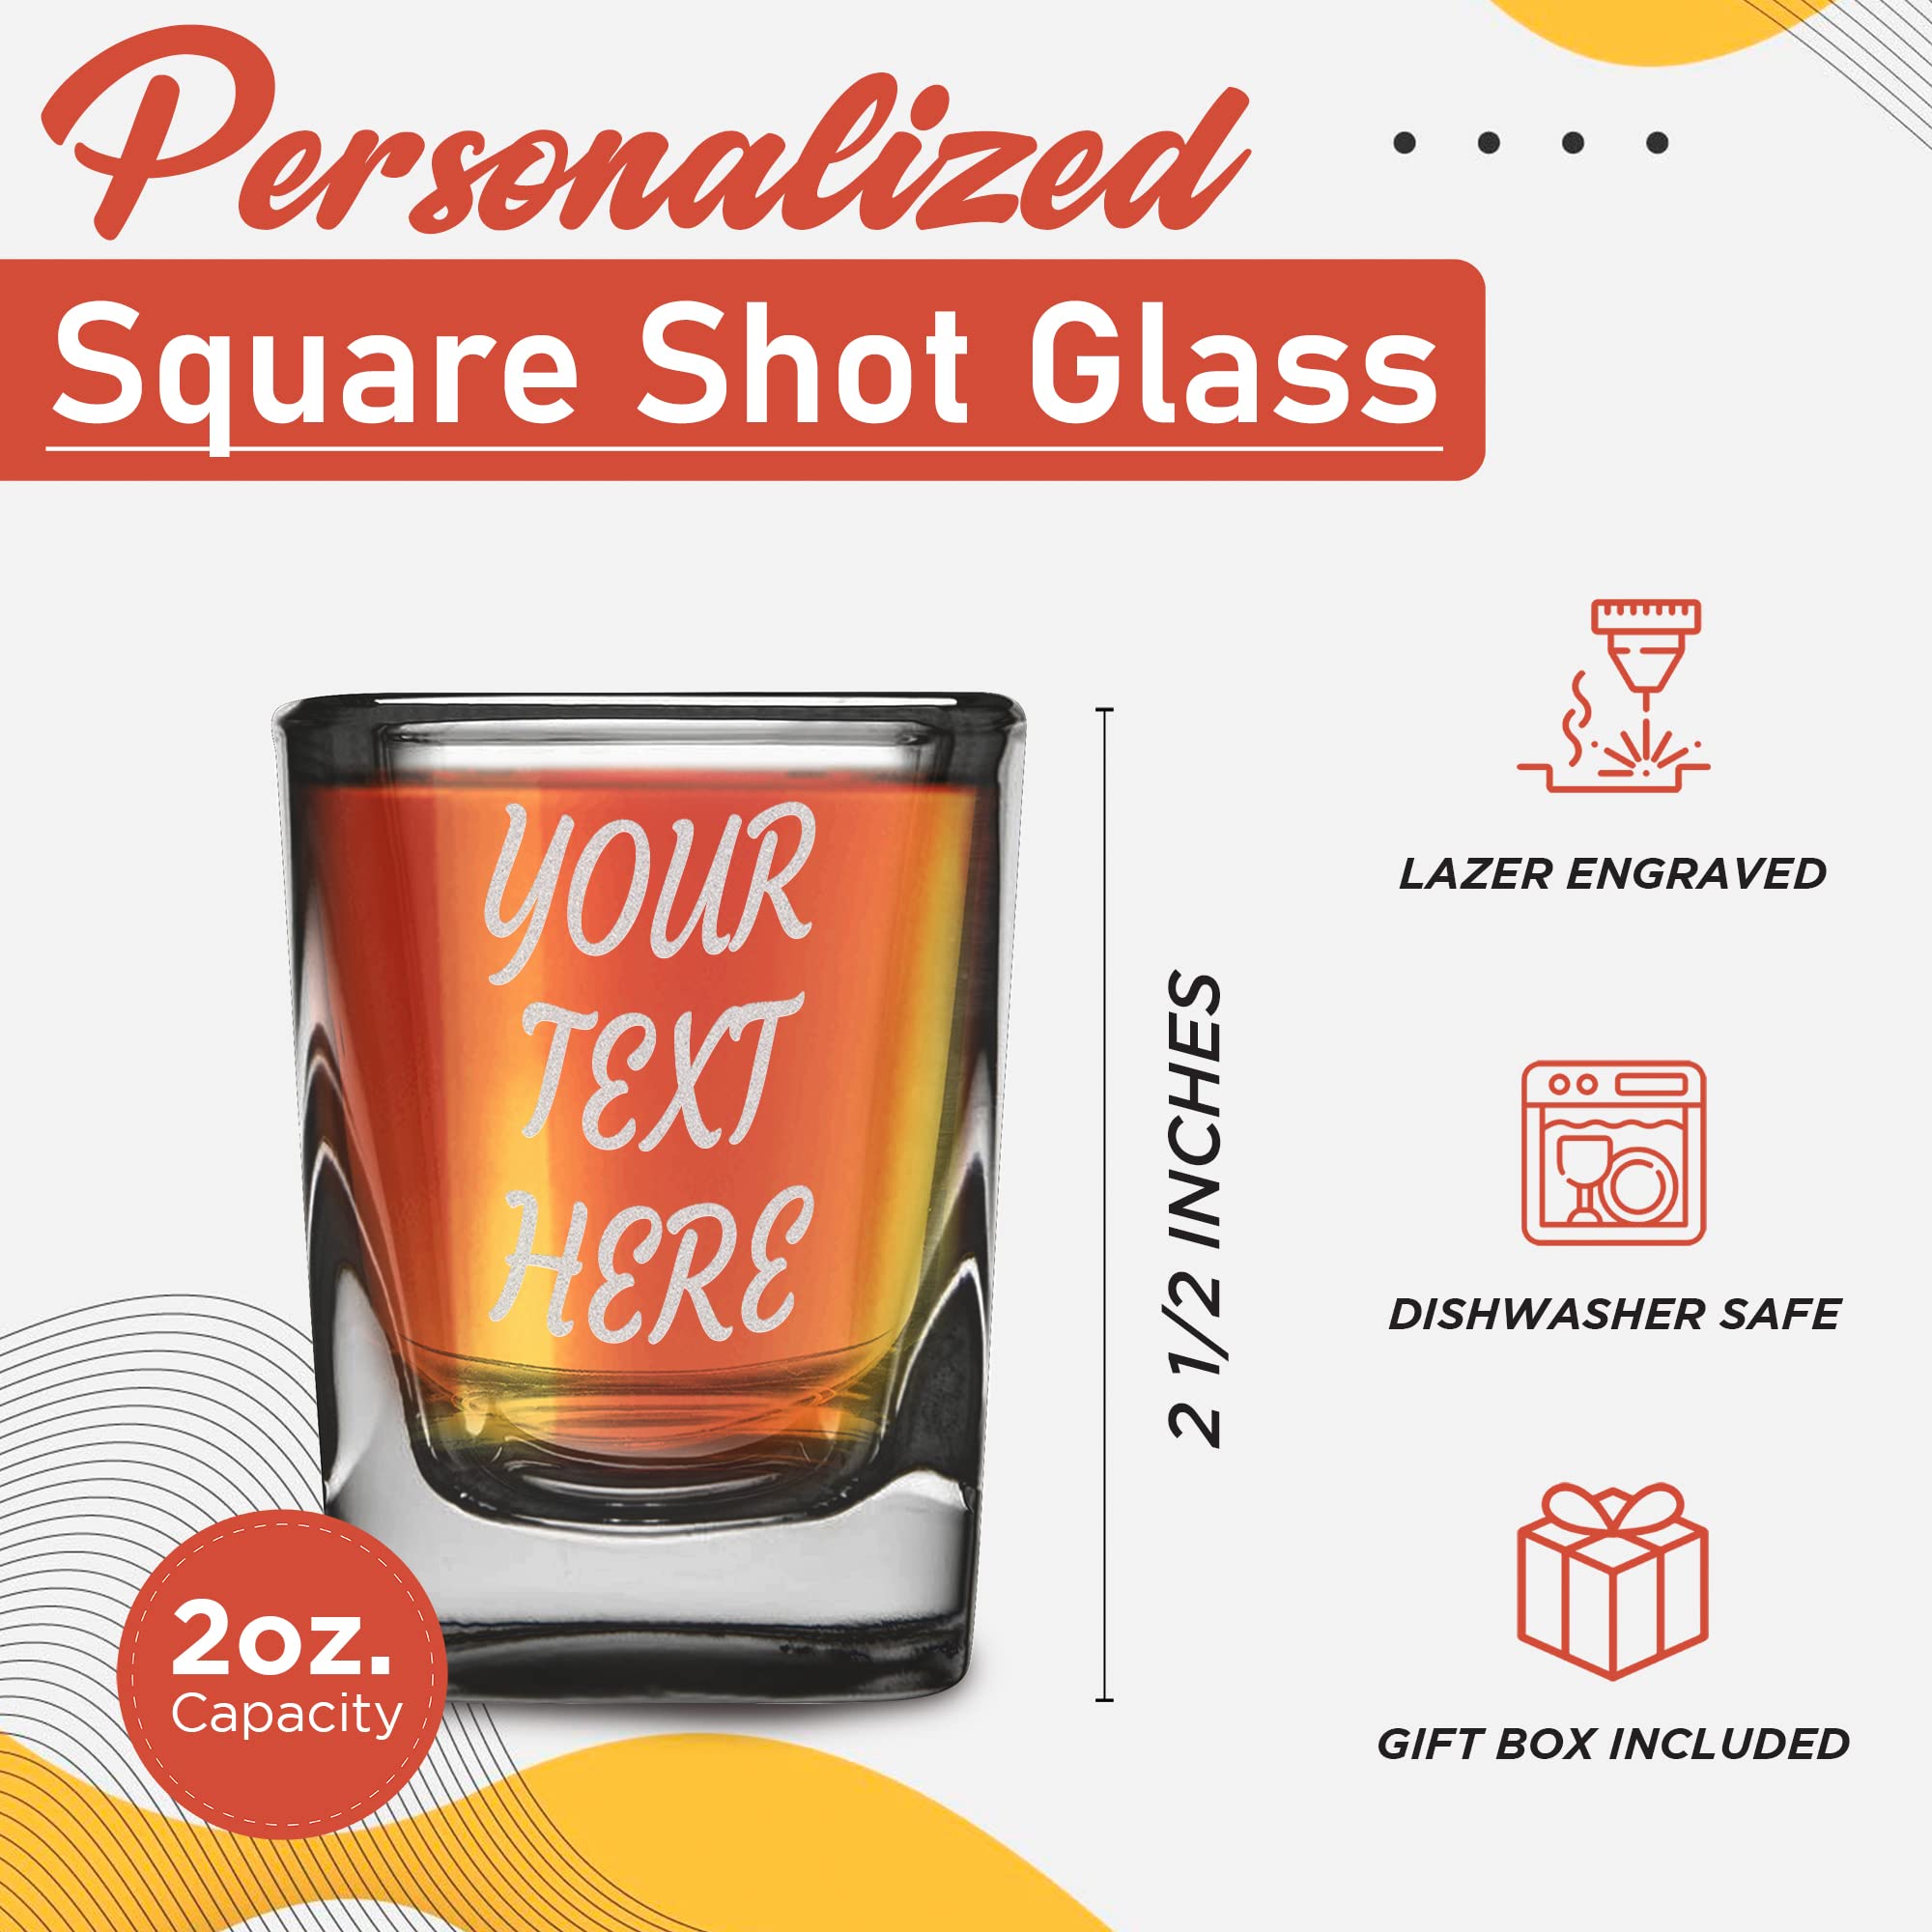 Personalized Your Text Laser Engraved Square Heavy Base Prism Shot Glass 2 oz. with Optional Gift Box, Custom Name Gifts for Him, Her